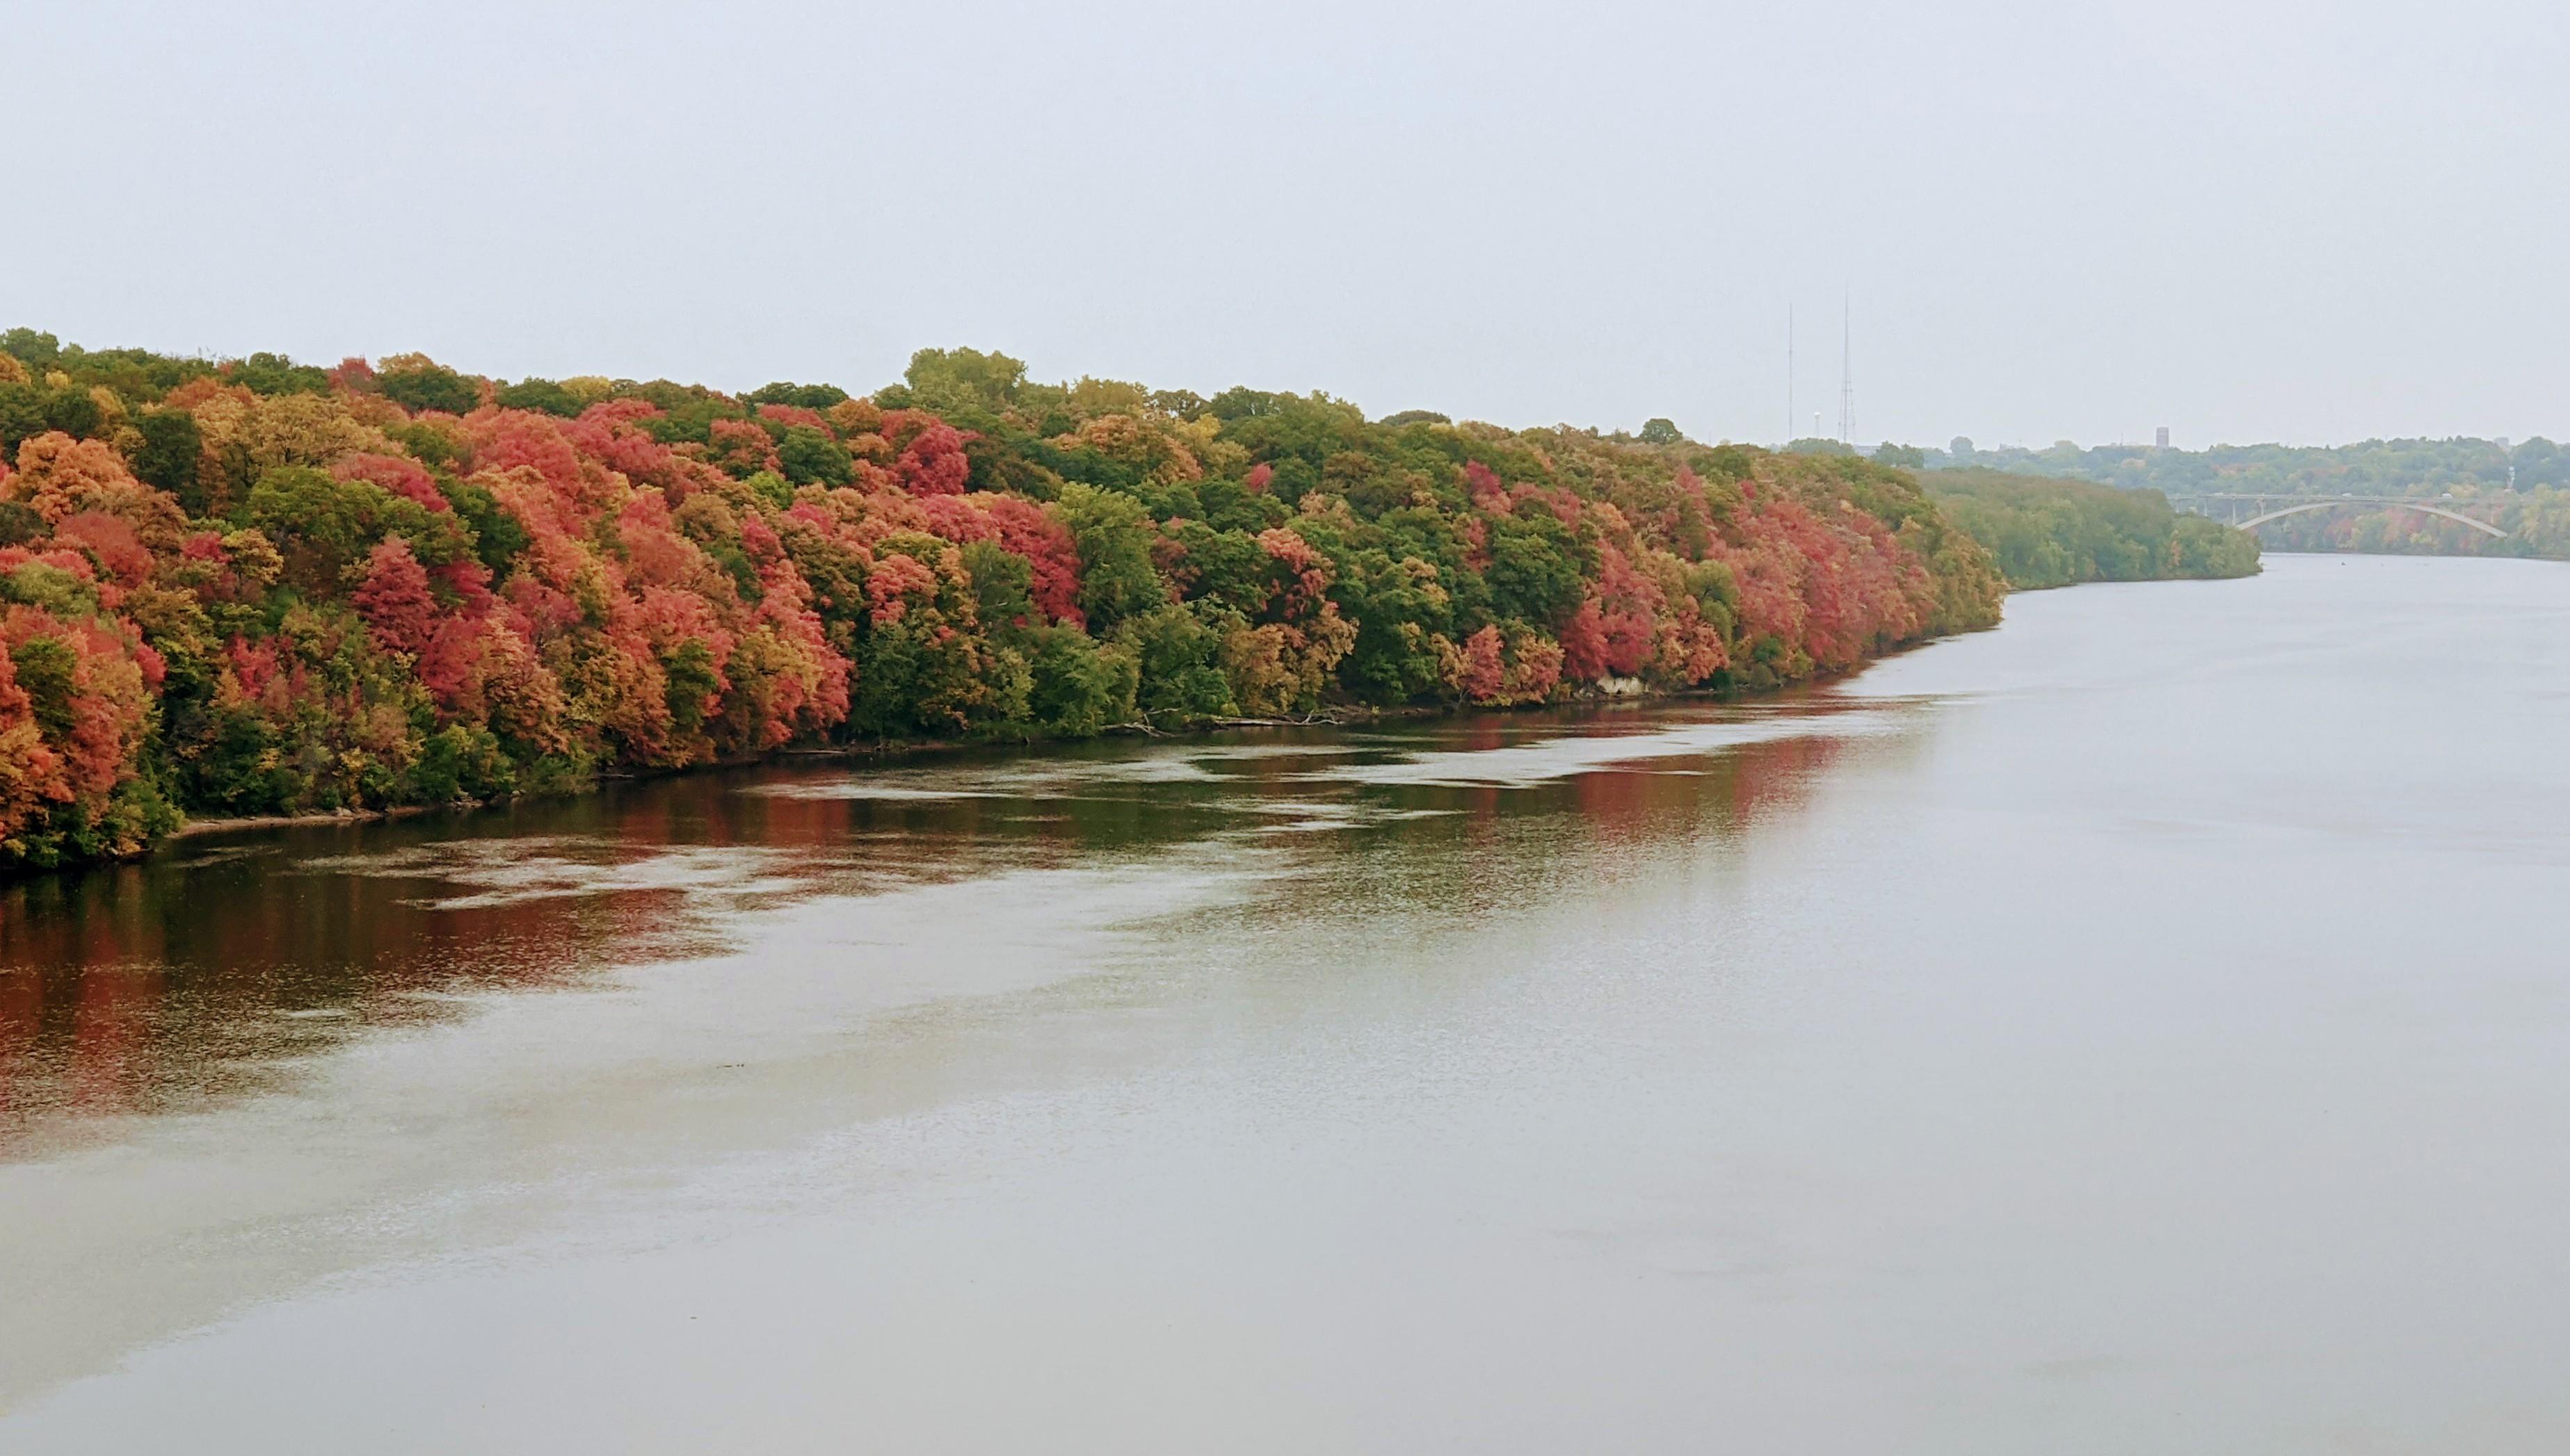 Trees showing fall colors on their leaves along the river.